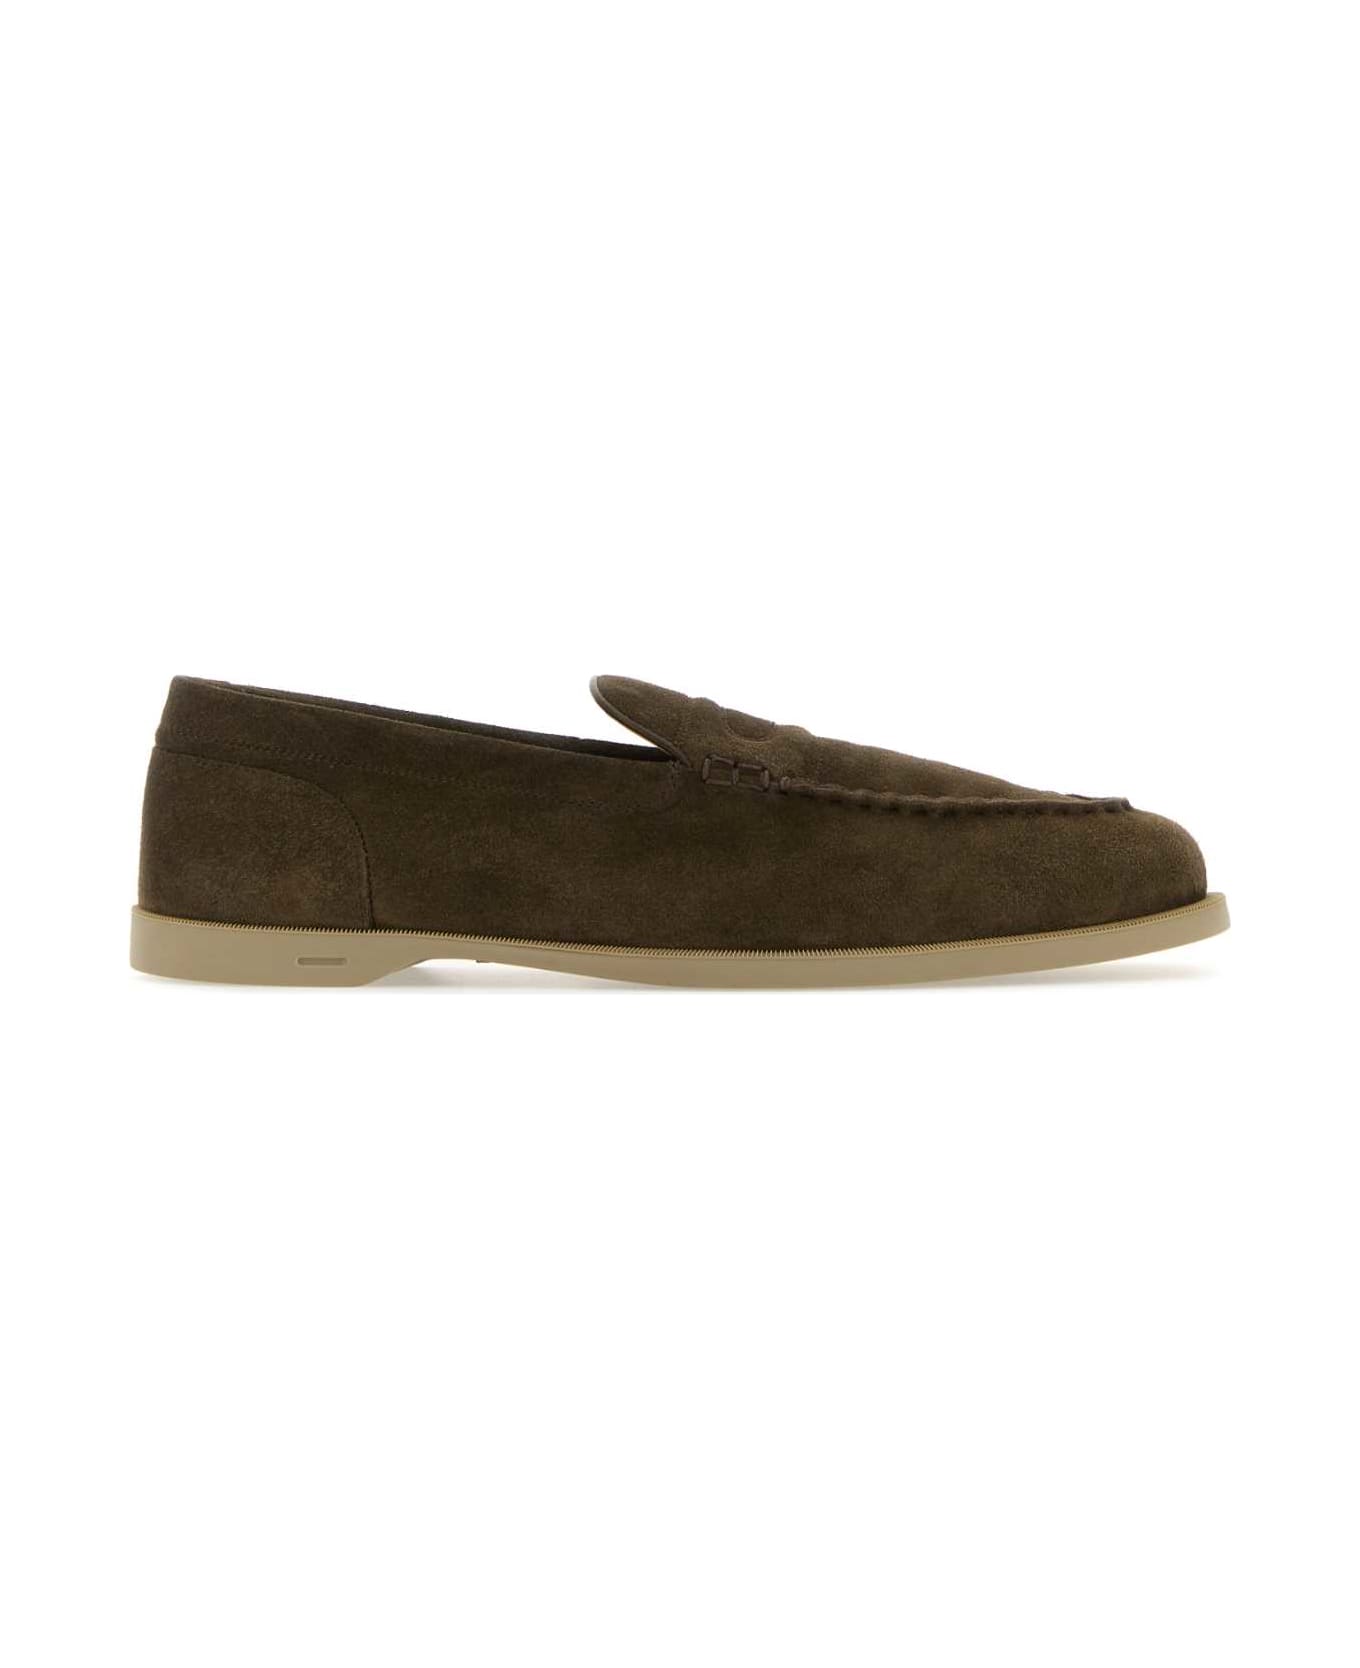 John Lobb Mud Suede Pace Loafers - 5K